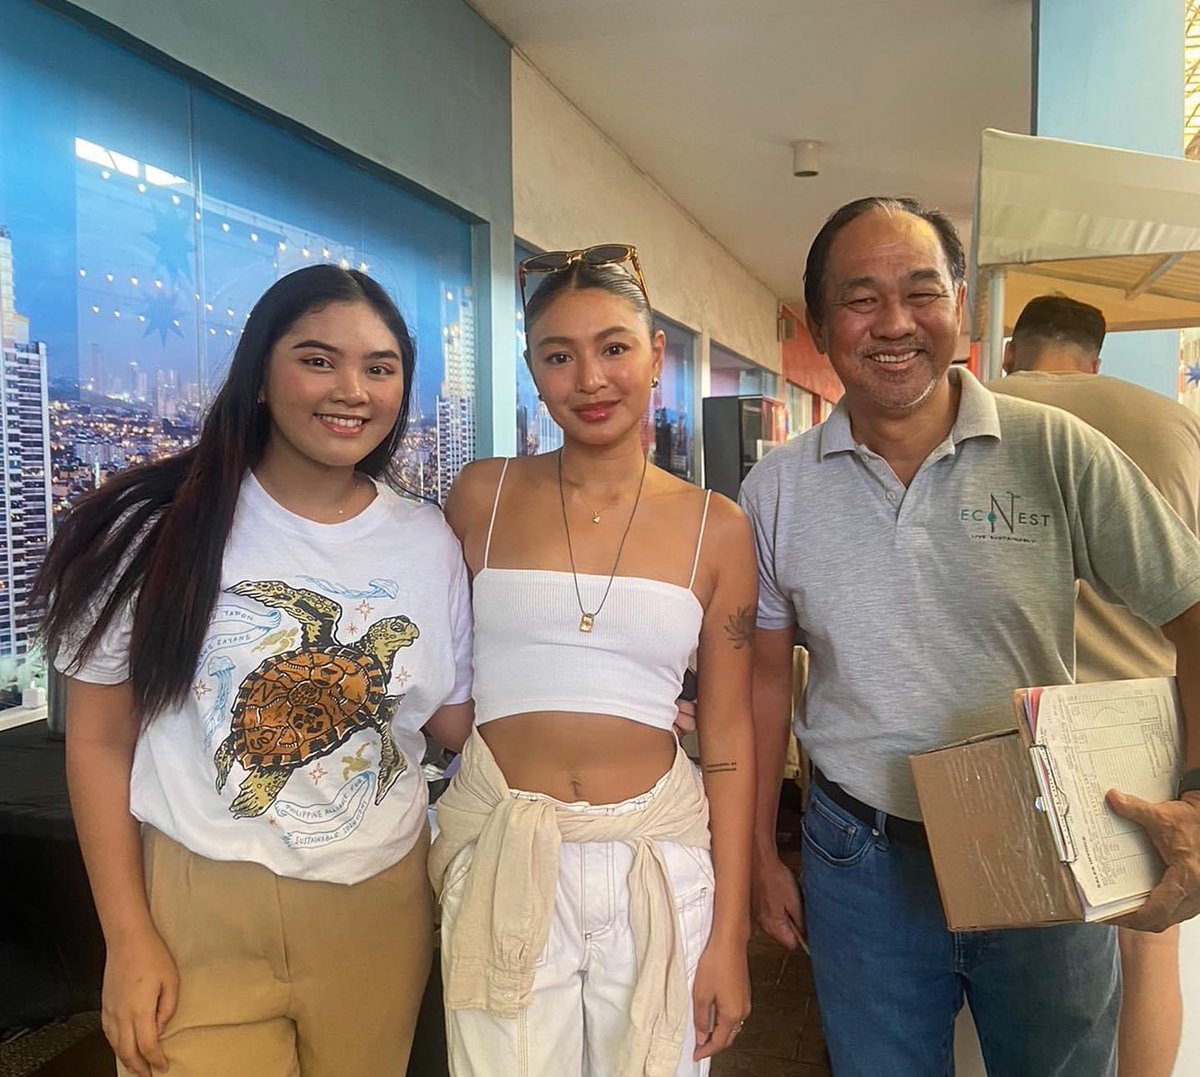 Pursuing #ZeroWasteLiving with good friends and family 🌱

Kudos to everyone at @vegfestpilipinas for making our #sustainableevents dream a reality 🥹

#NadineLustre

📷 econestph